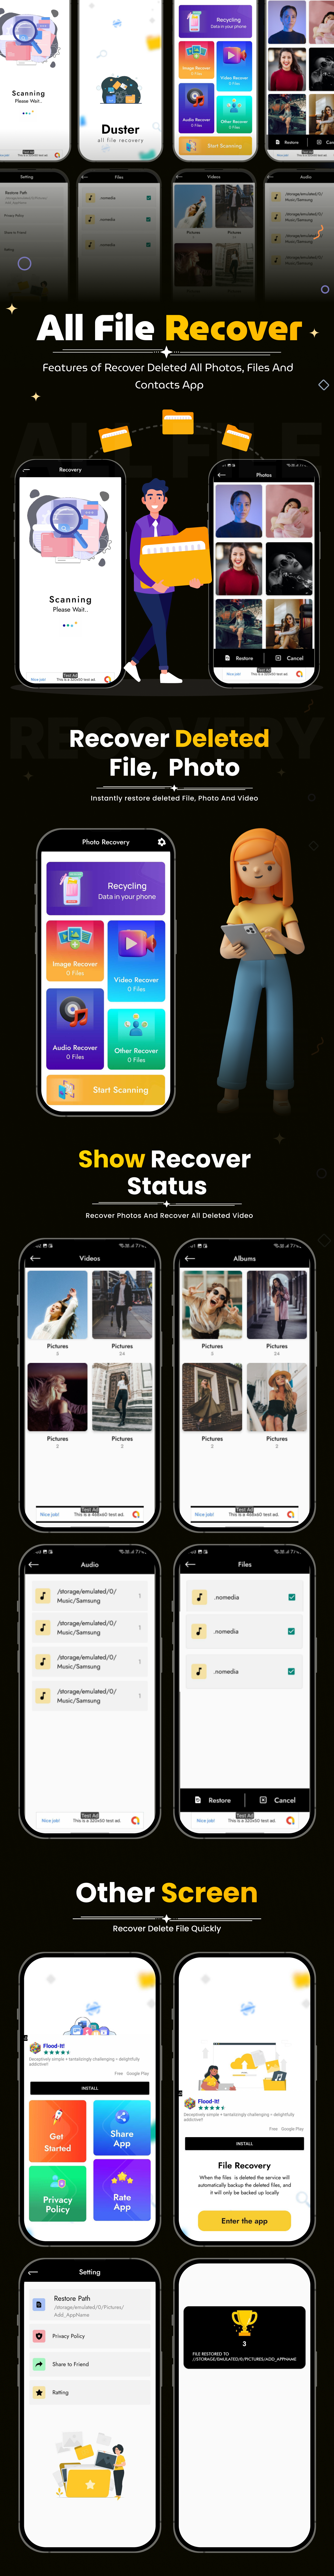 All FIle Recovery Tool App | Gallary Recovery Tools | All File recovery | Admob Ads | Android - 1